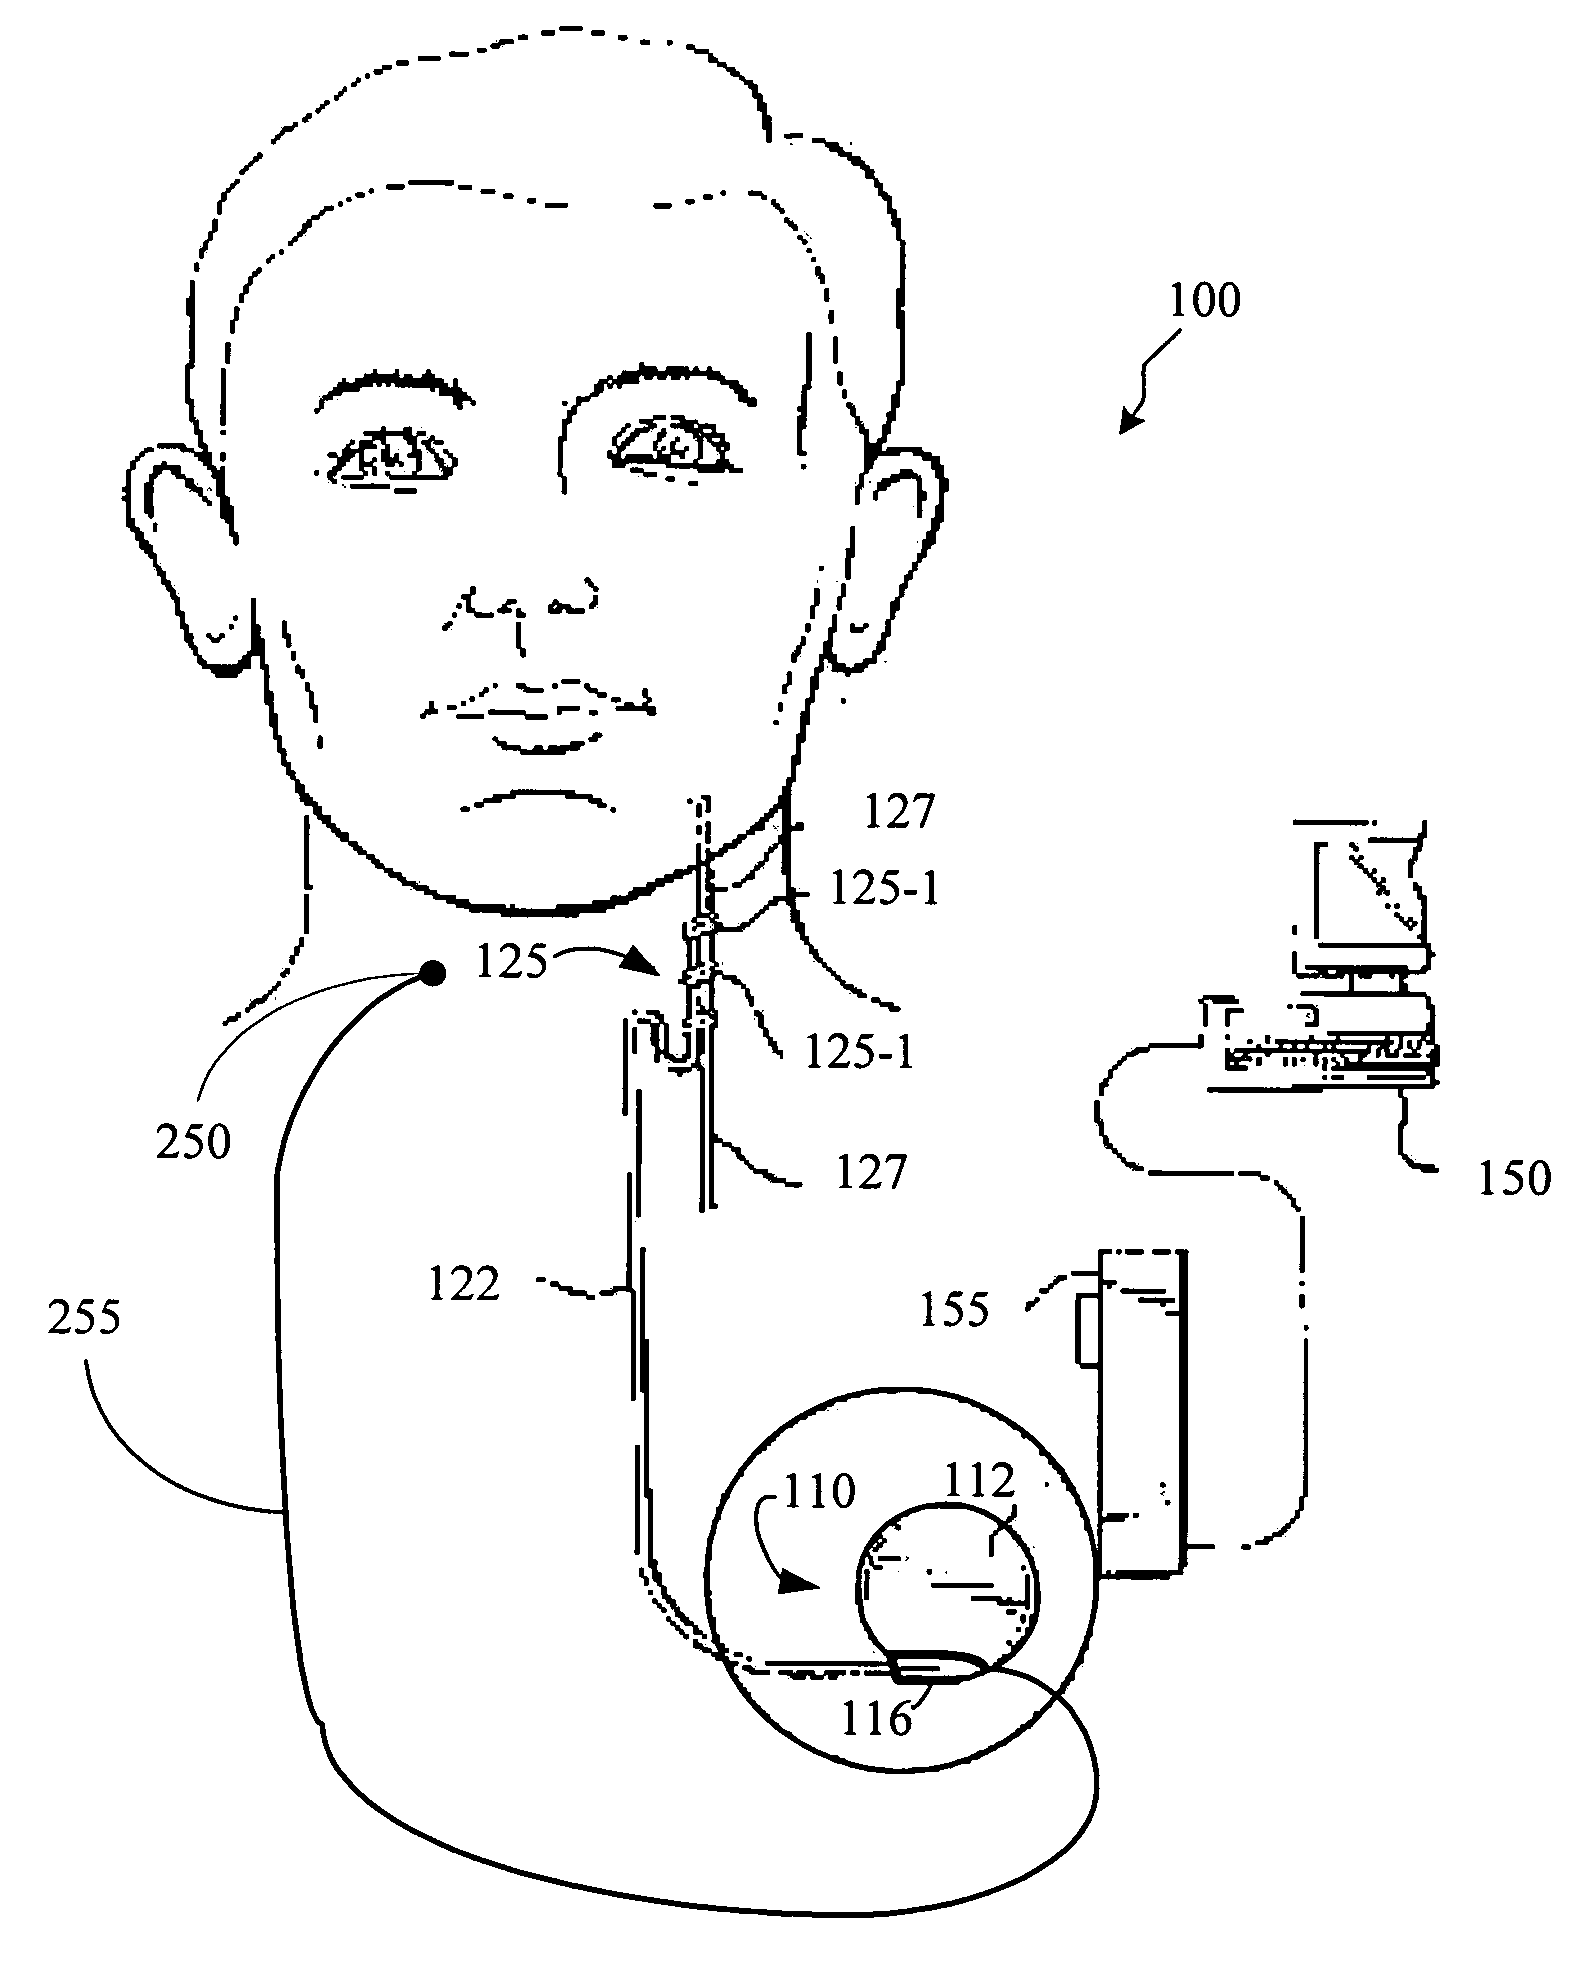 Variable output ramping for an implantable medical device